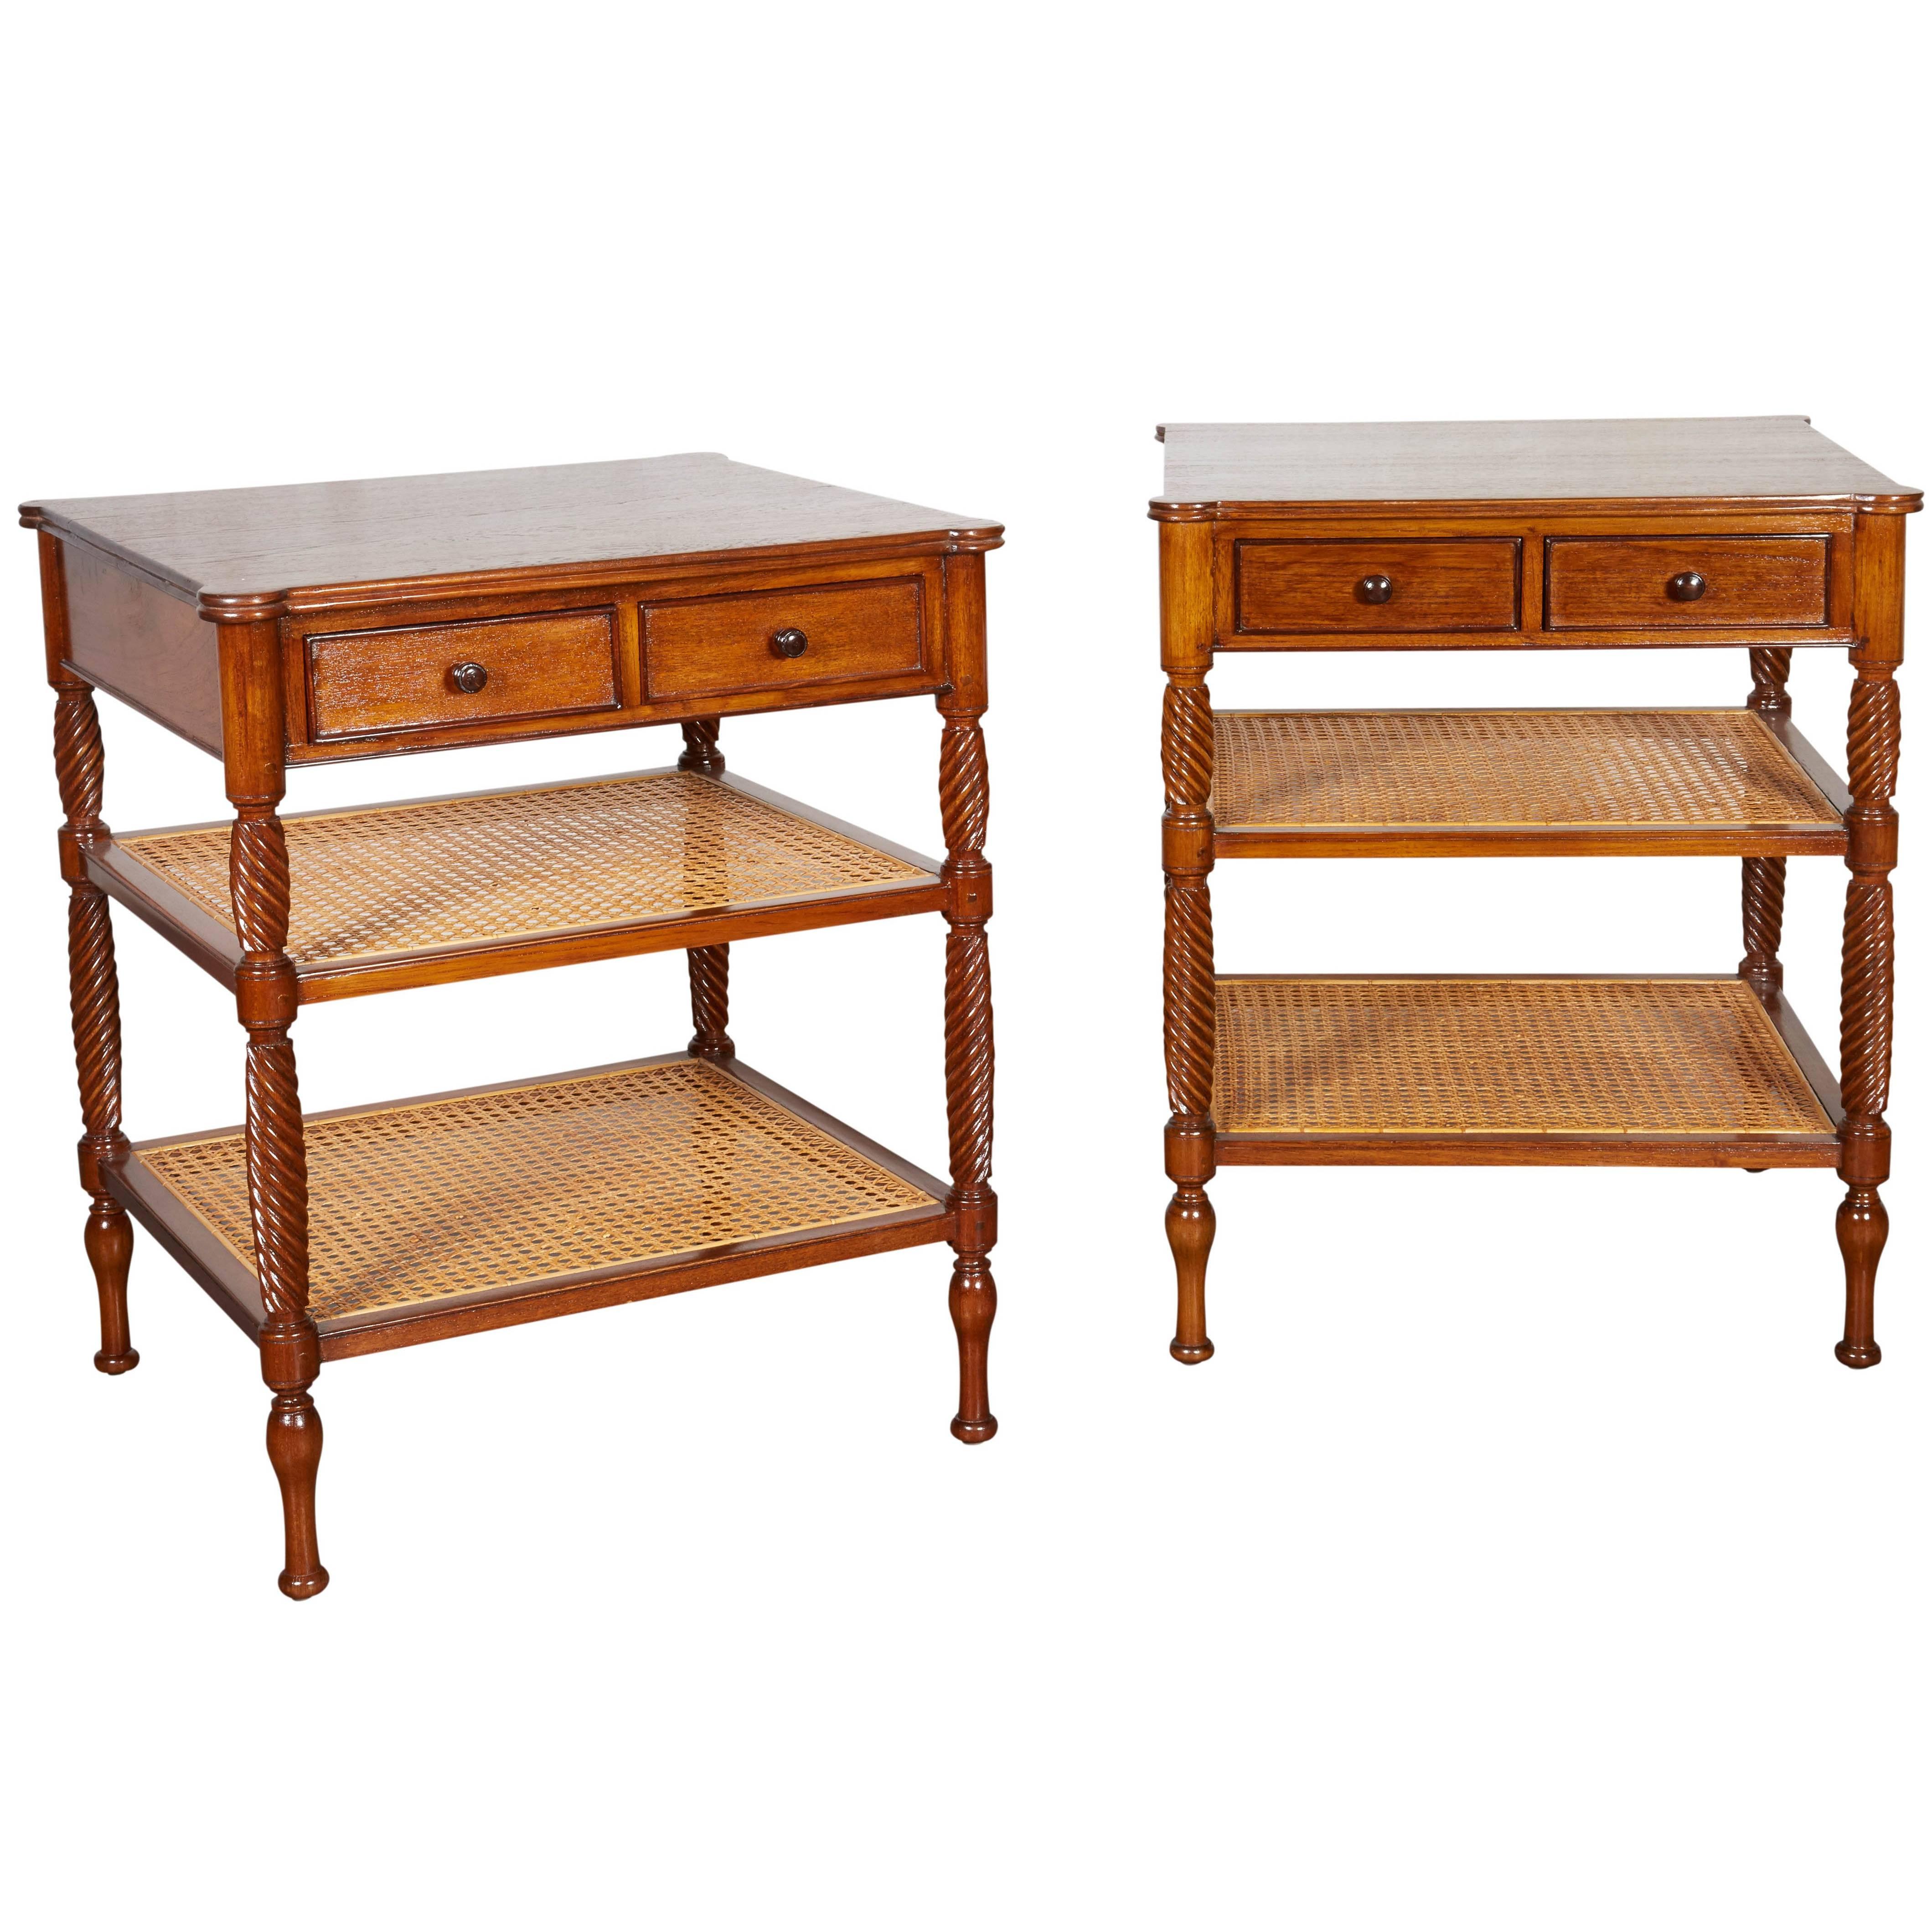 Pair of Teak and Caned Etagere Side Tables